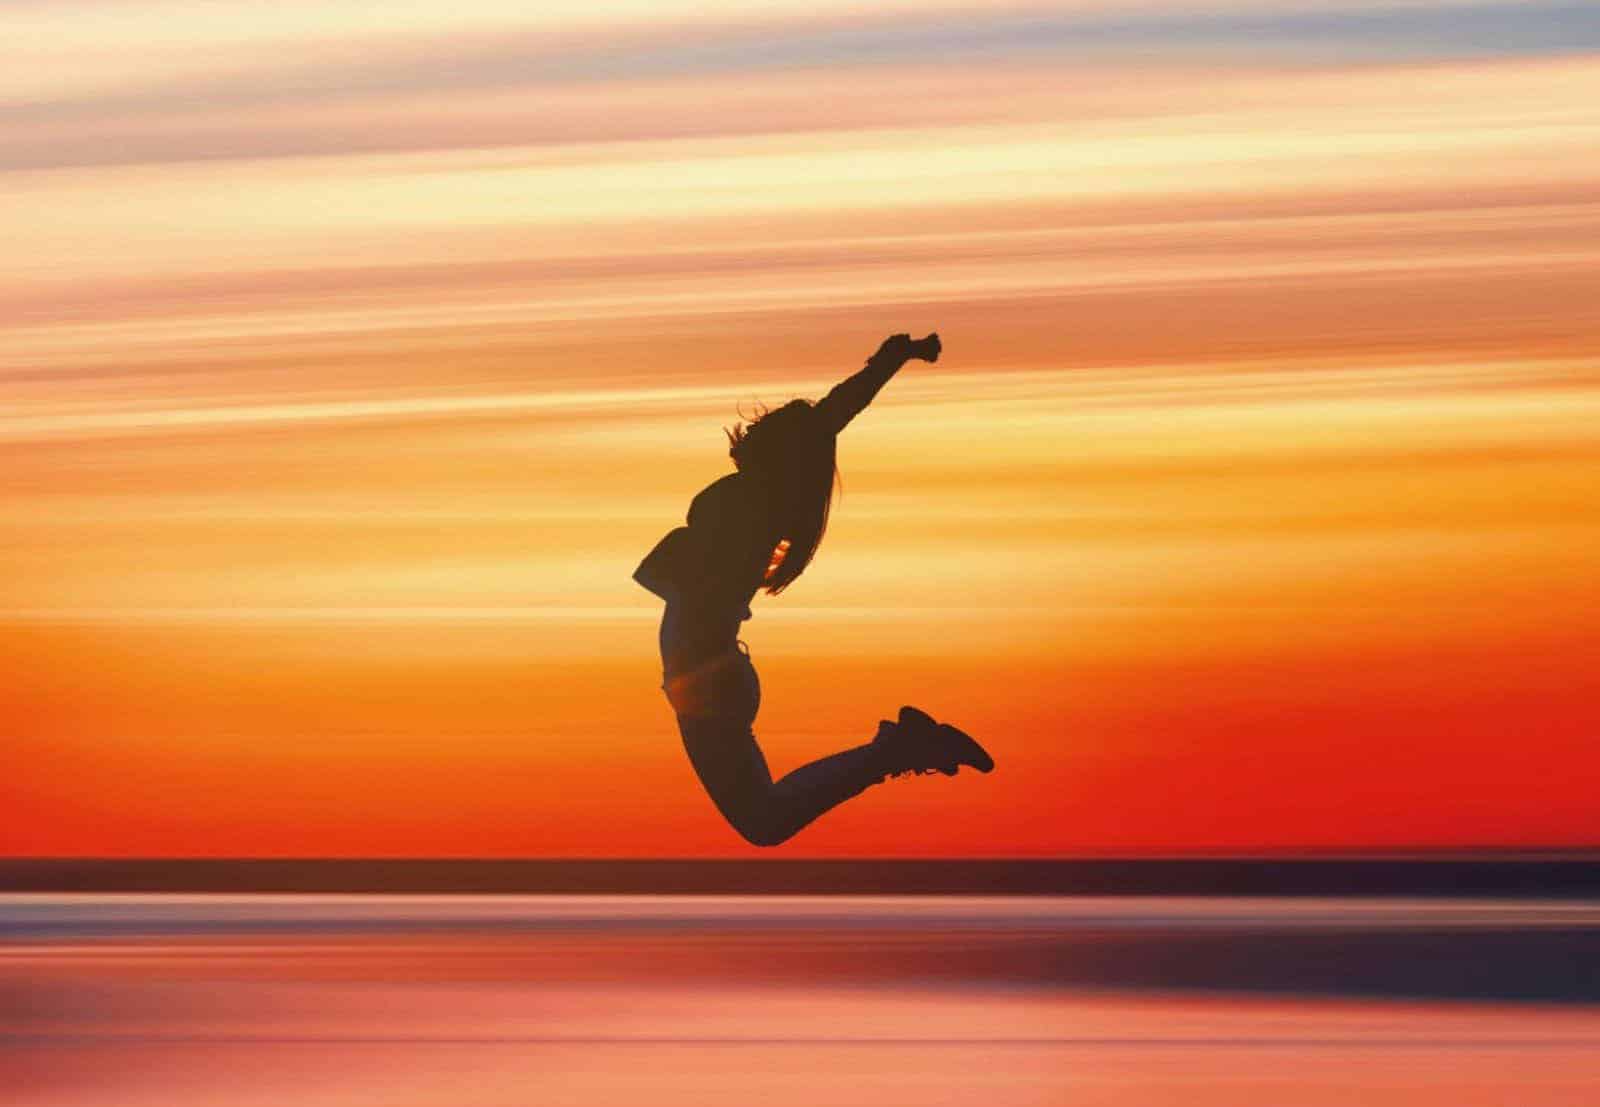 A woman's silhouette jumping up near ocean during bright sunset that fills the entire frame